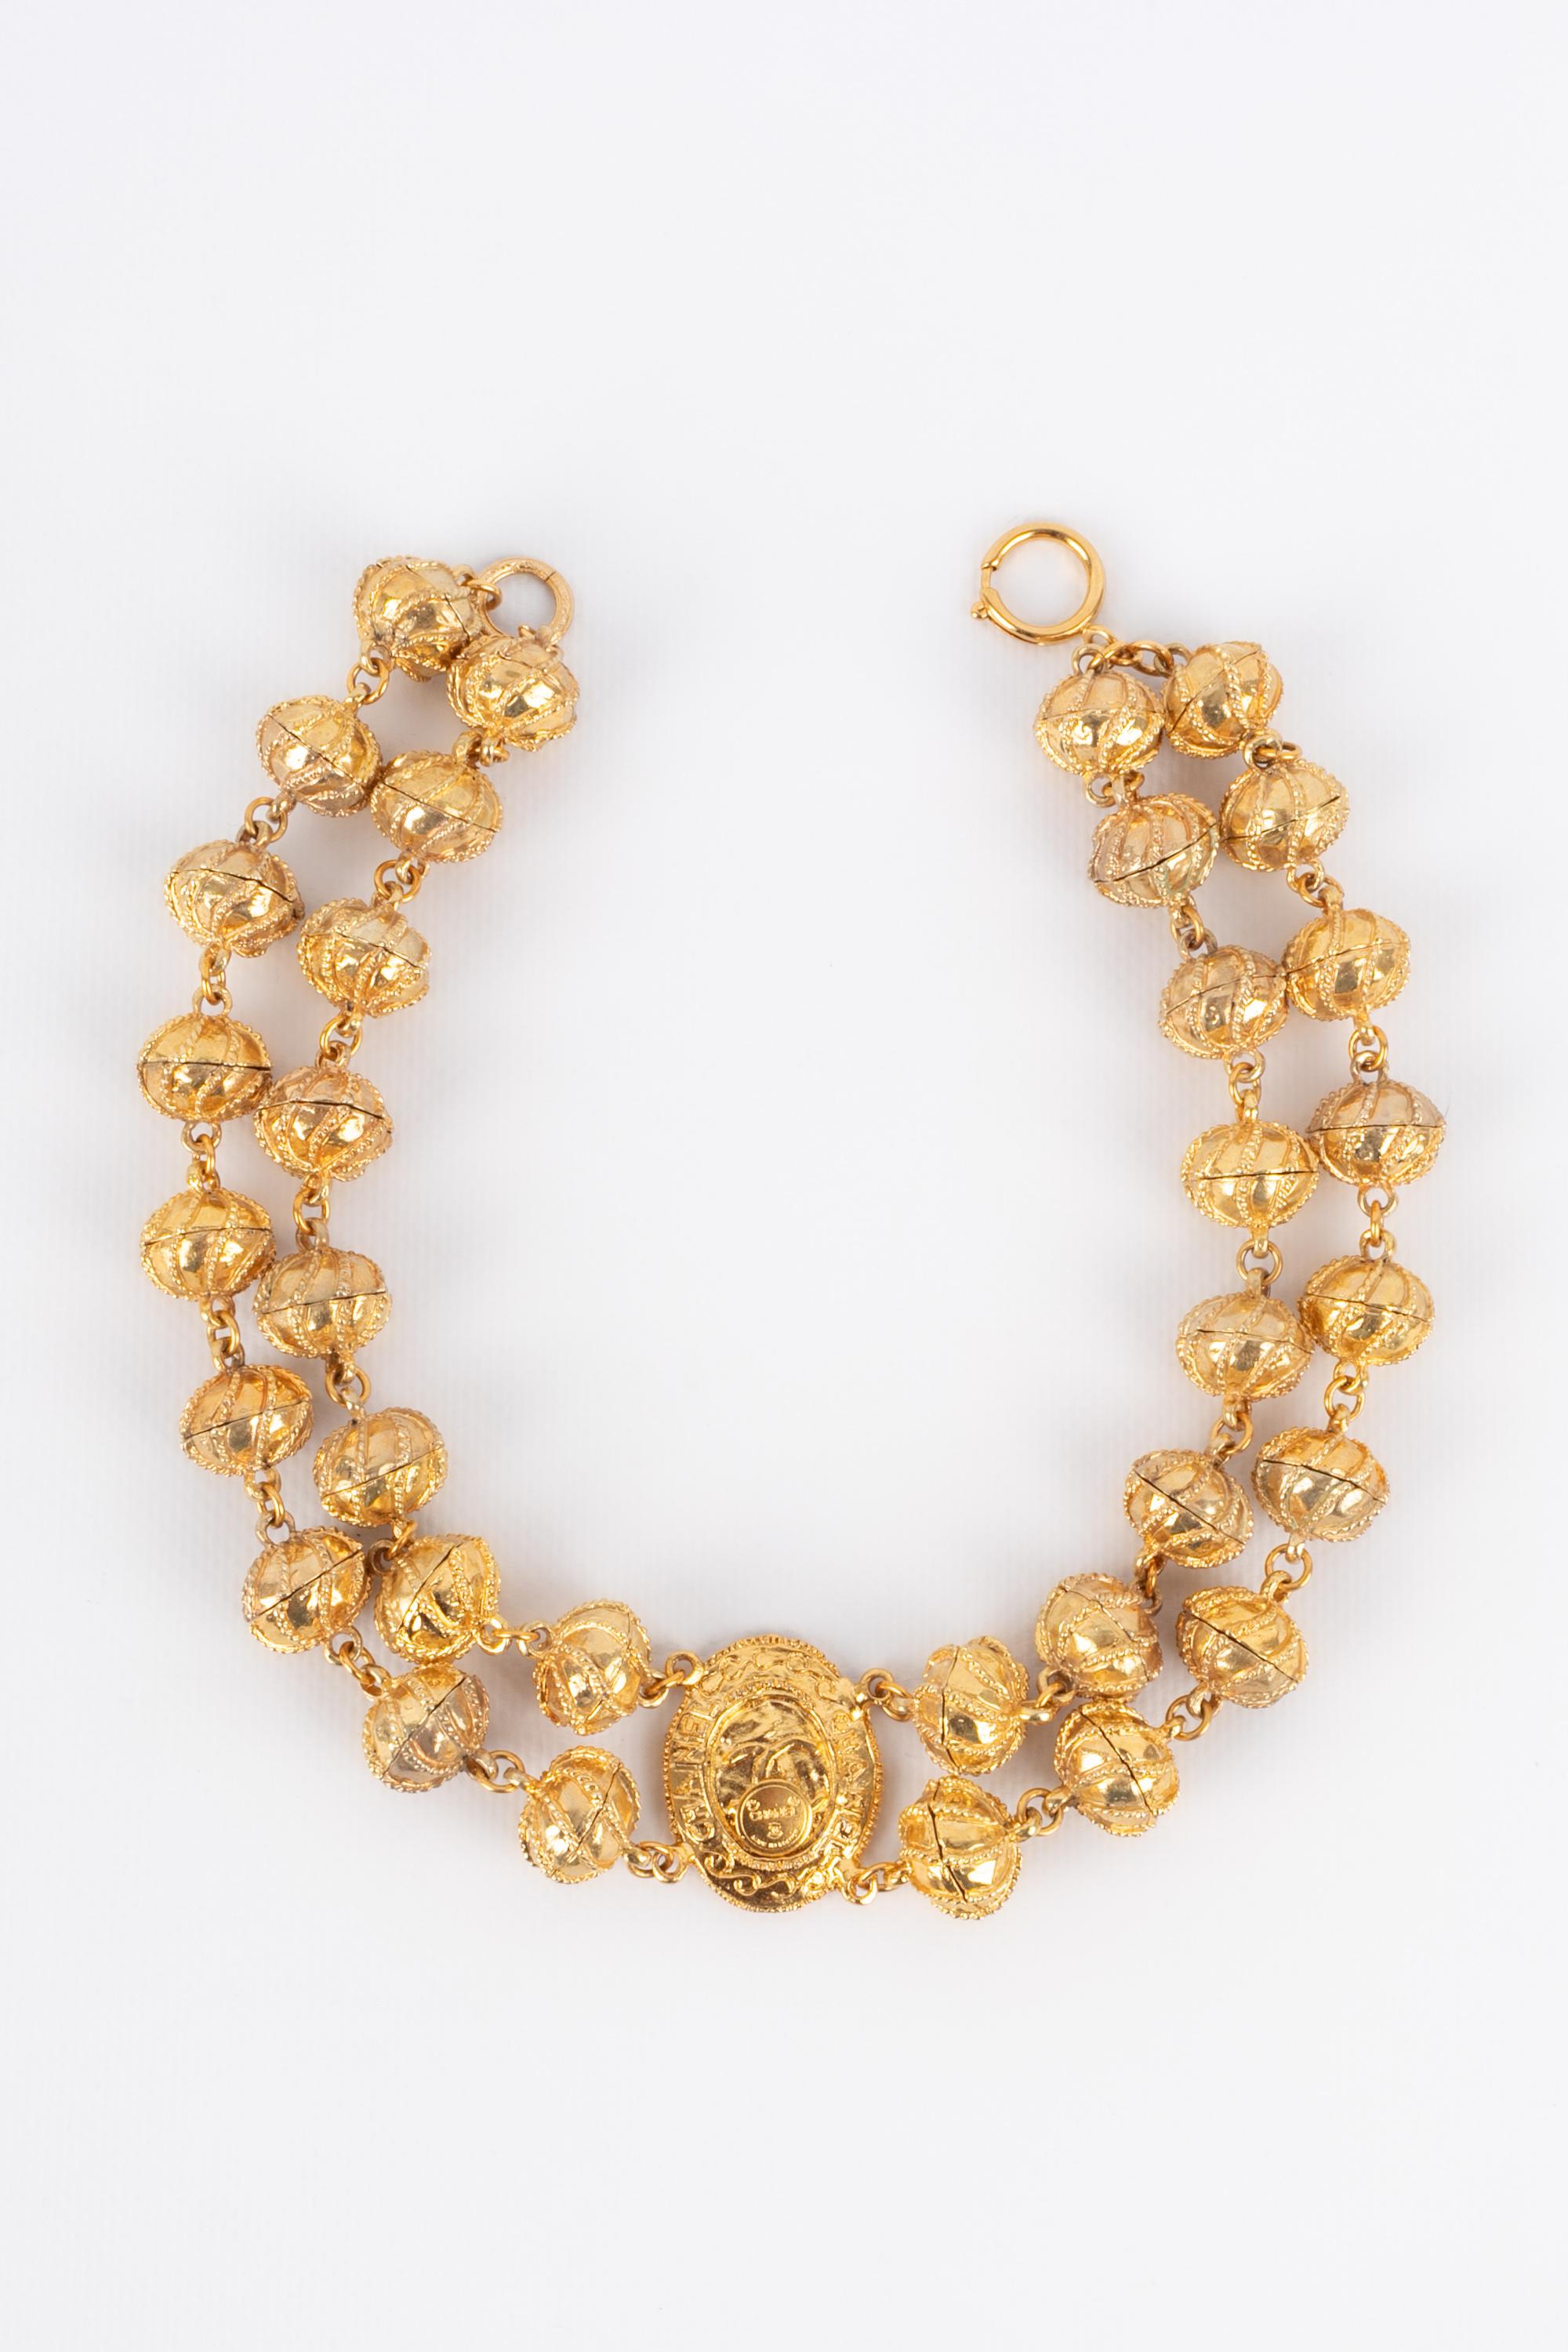 CHANEL - (Made in France) Two-row golden metal necklace from the 1980s.

Condition:
Very good condition

Dimensions:
Length: 42 cm

CB251